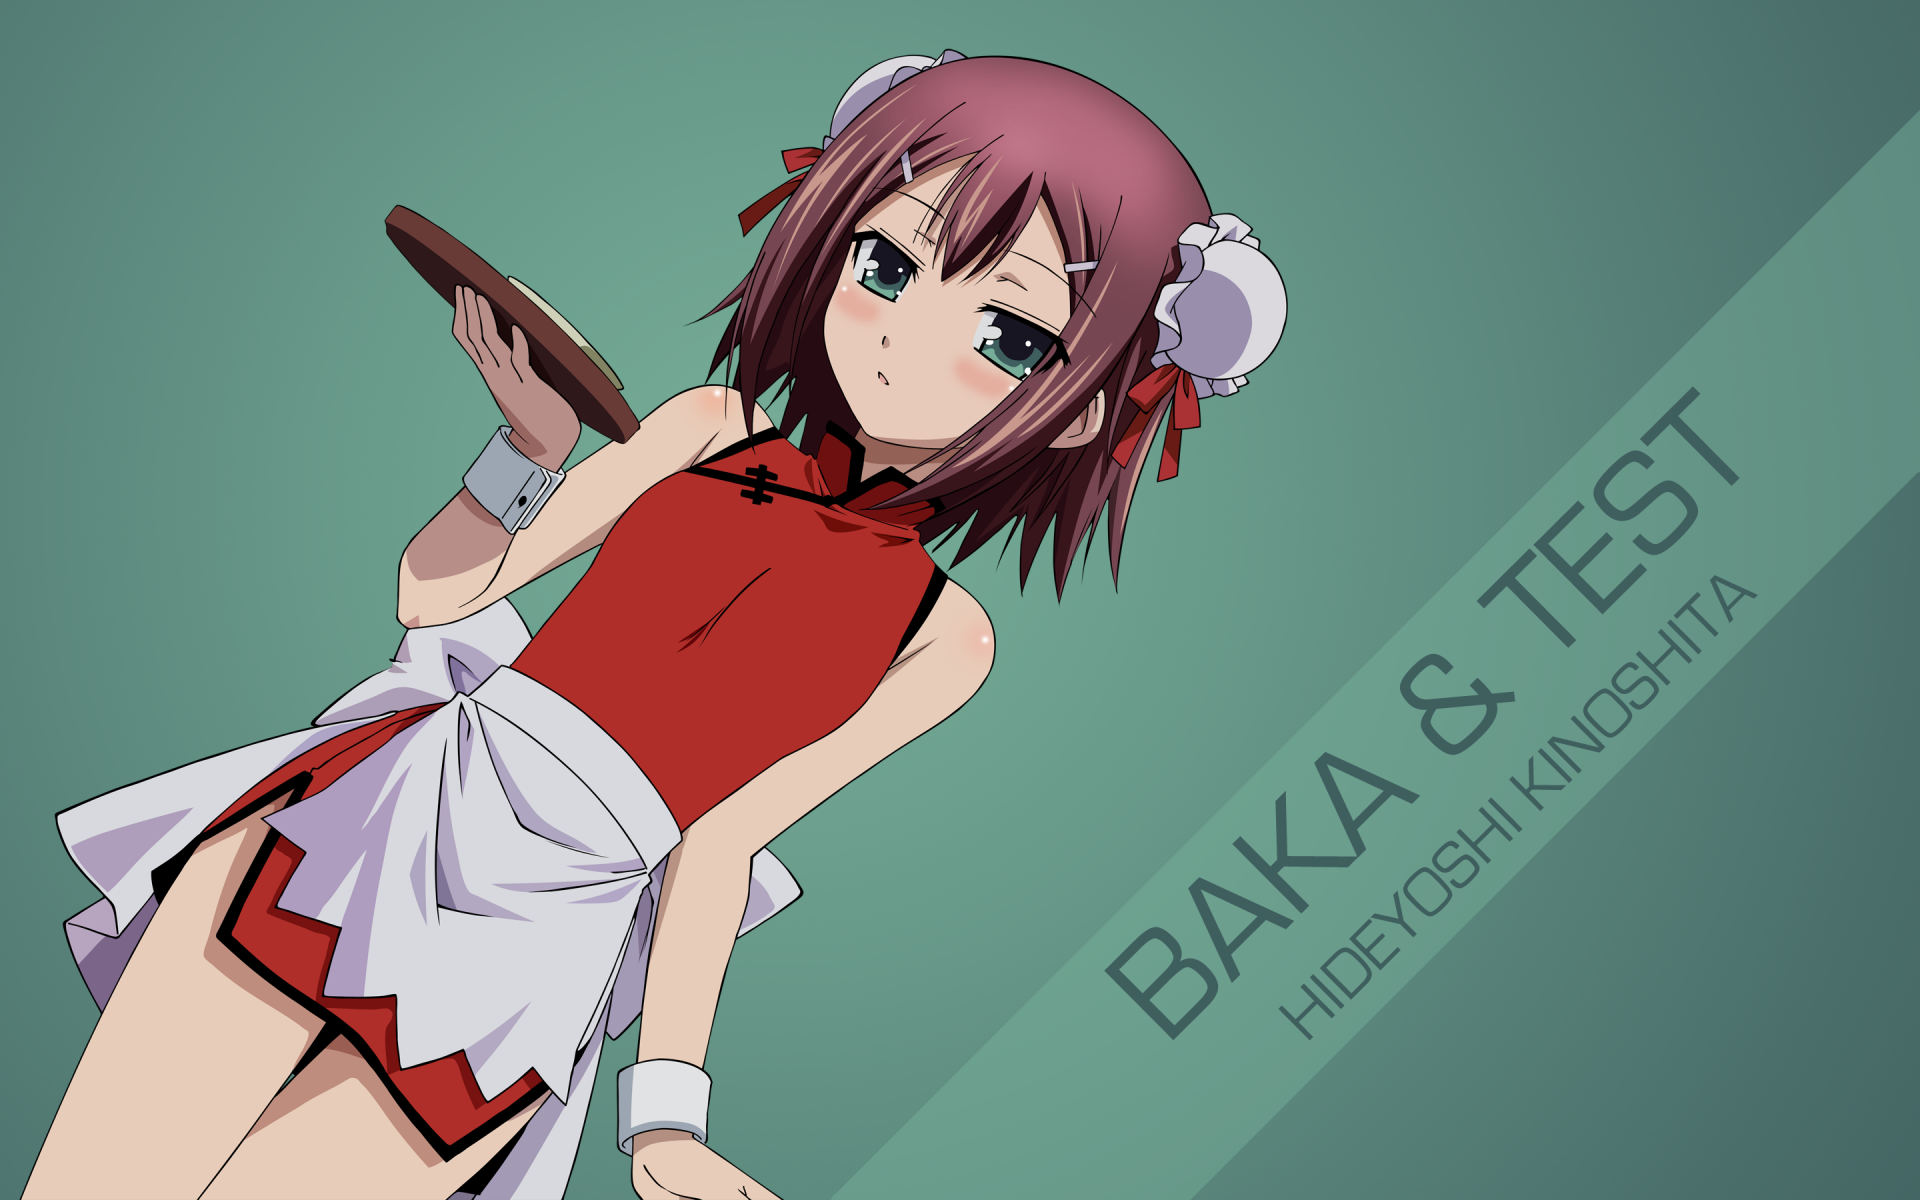 Anime Baka And Test Hd Wallpaper By Spectralfire234